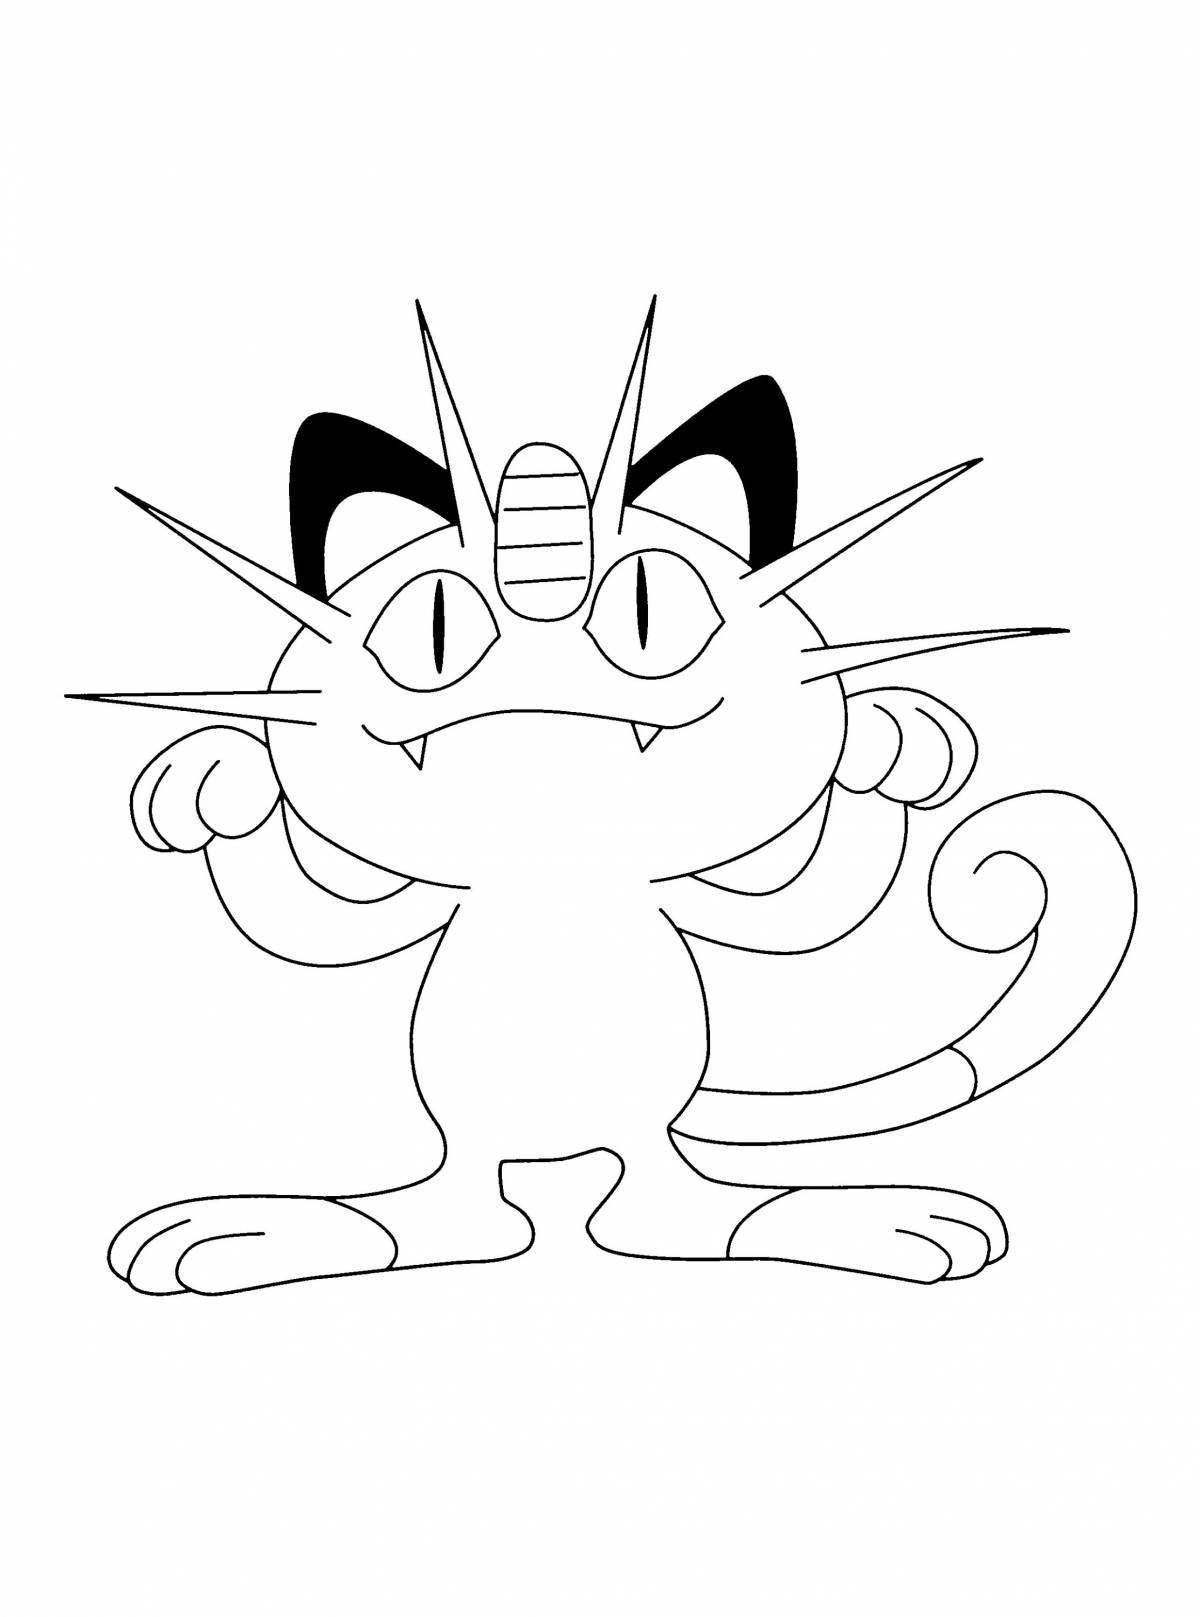 Cute meowth coloring book